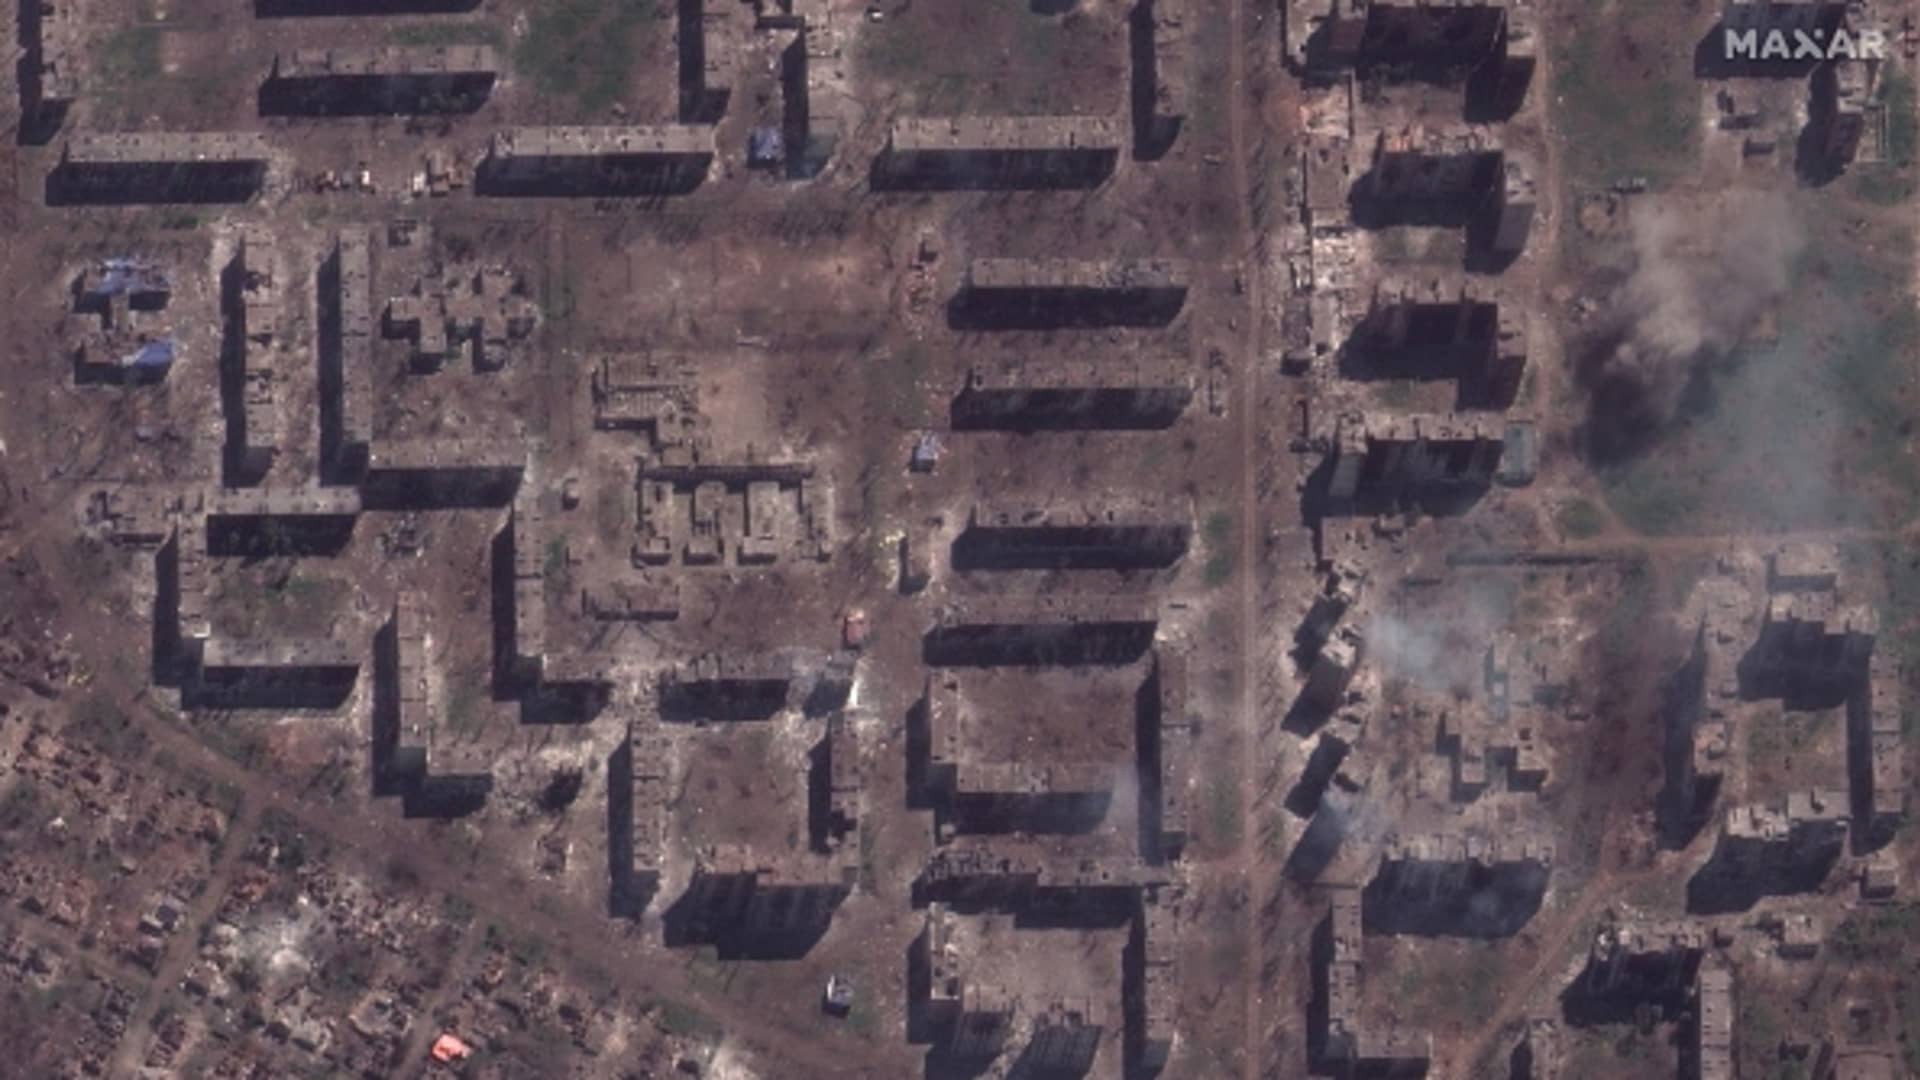 Maxar satellite imagery comparing the before/after destruction of the Bakhmut high school and homes in Bakhmut, Ukraine. 